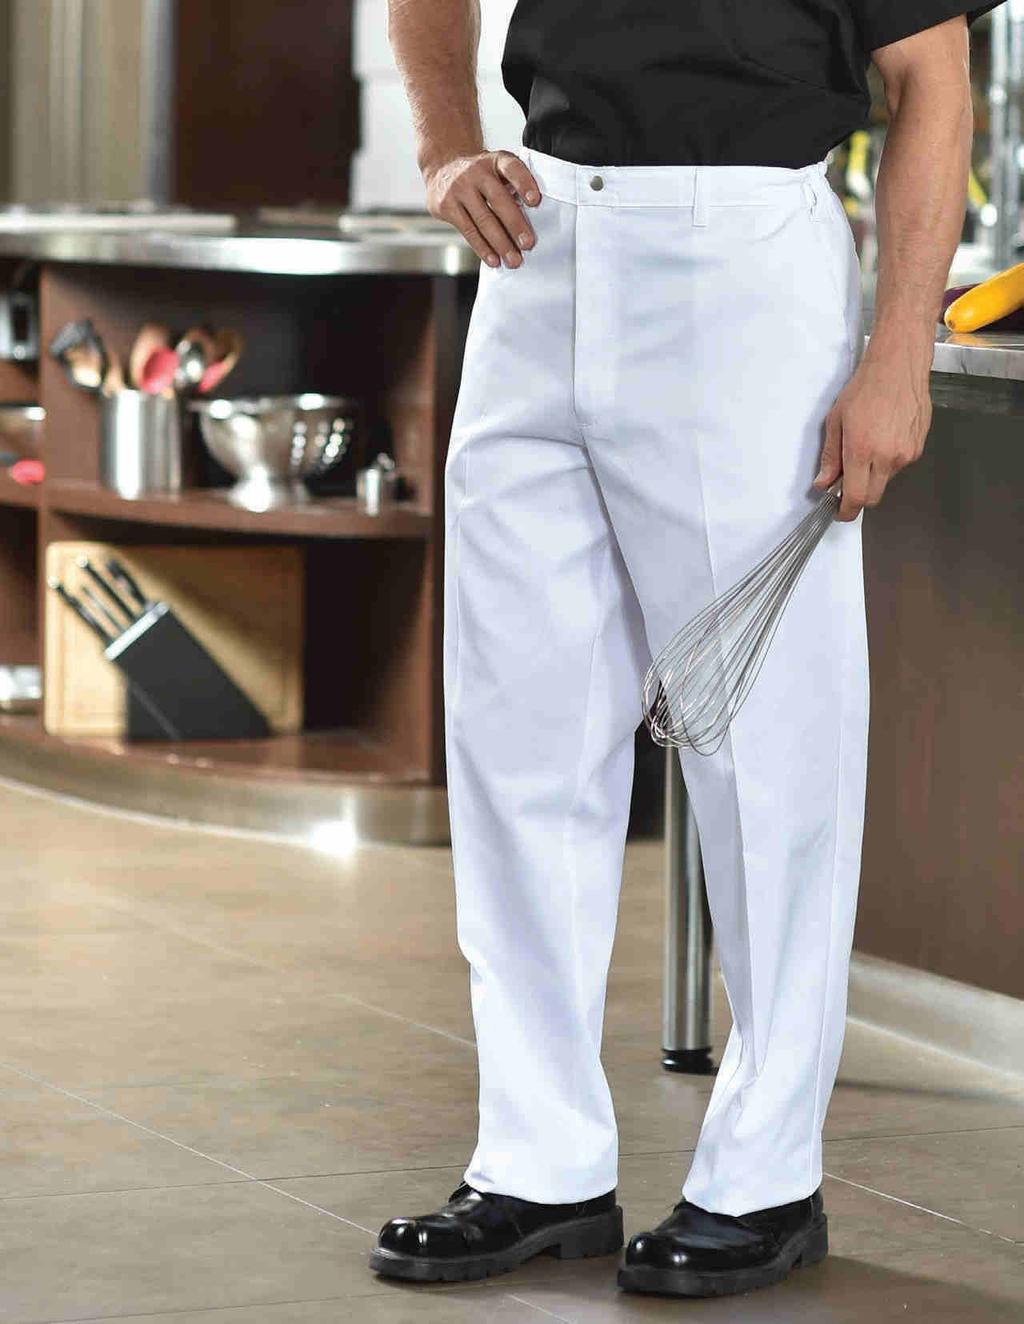 WORK PANTS Side Elastic Work Pants - side Elastic The strong poly-cotton blend material offers a clean and neat